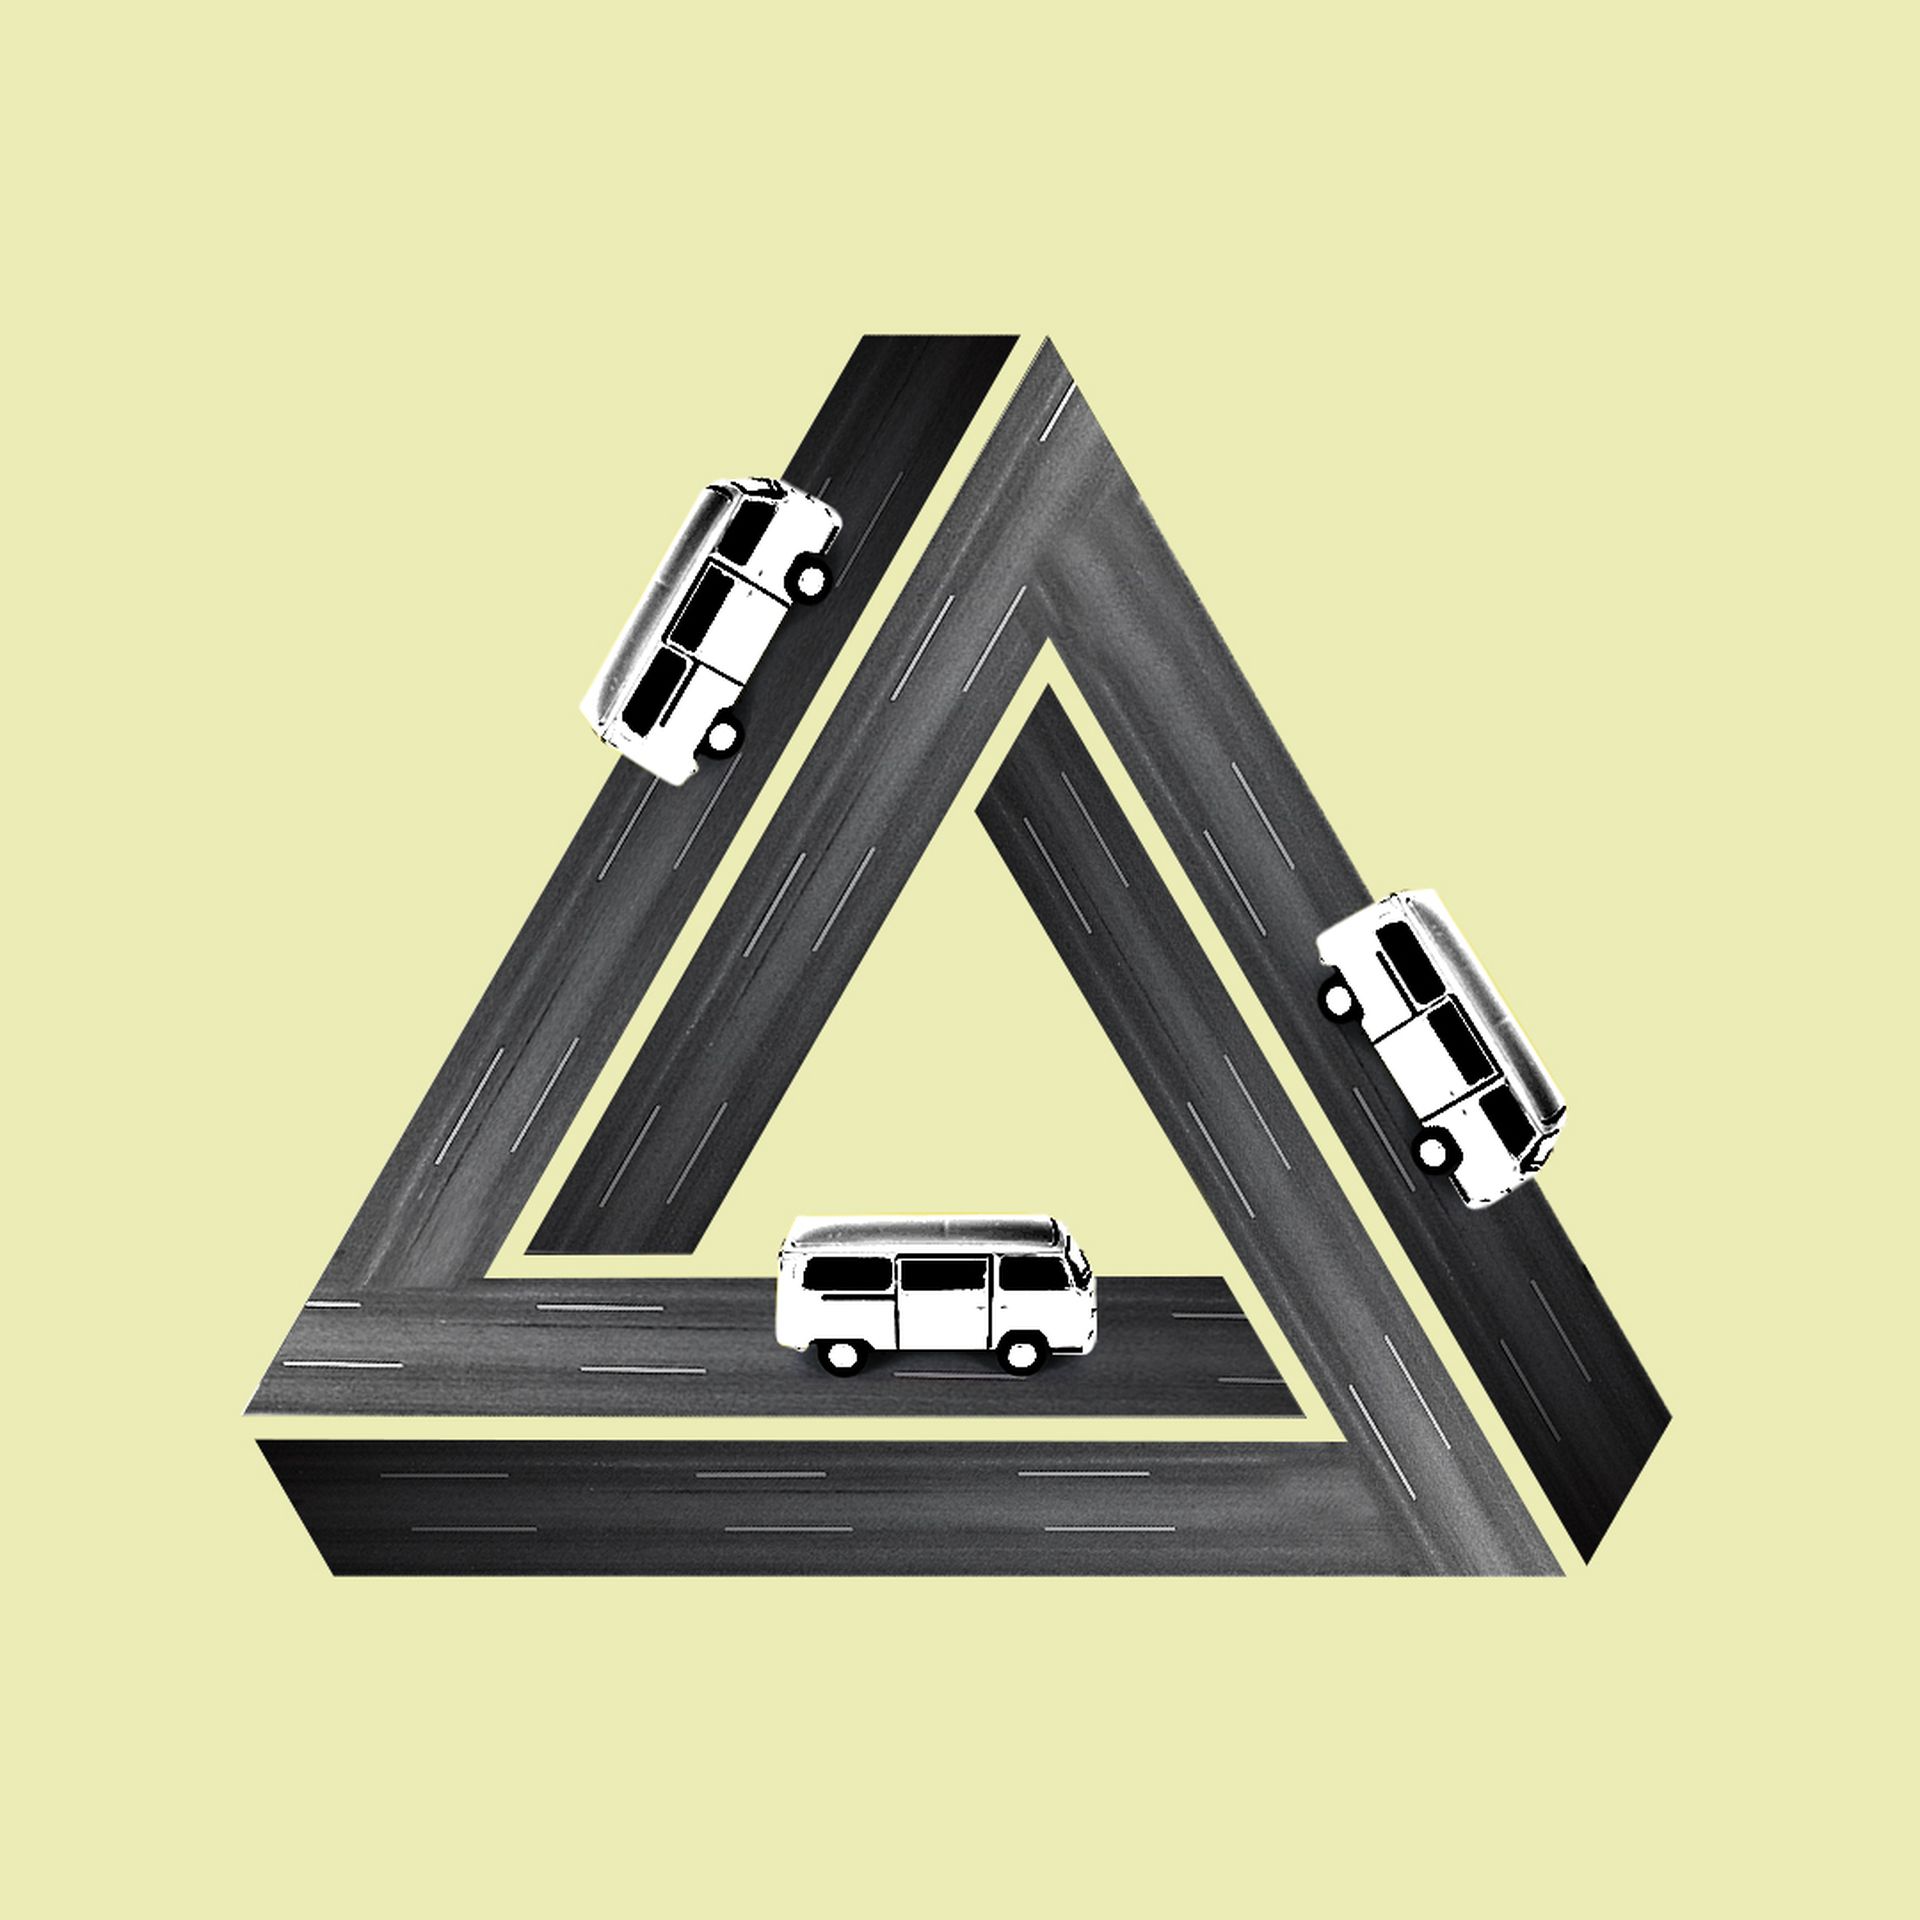 Illustration of roads in the shape of a penrose triangle